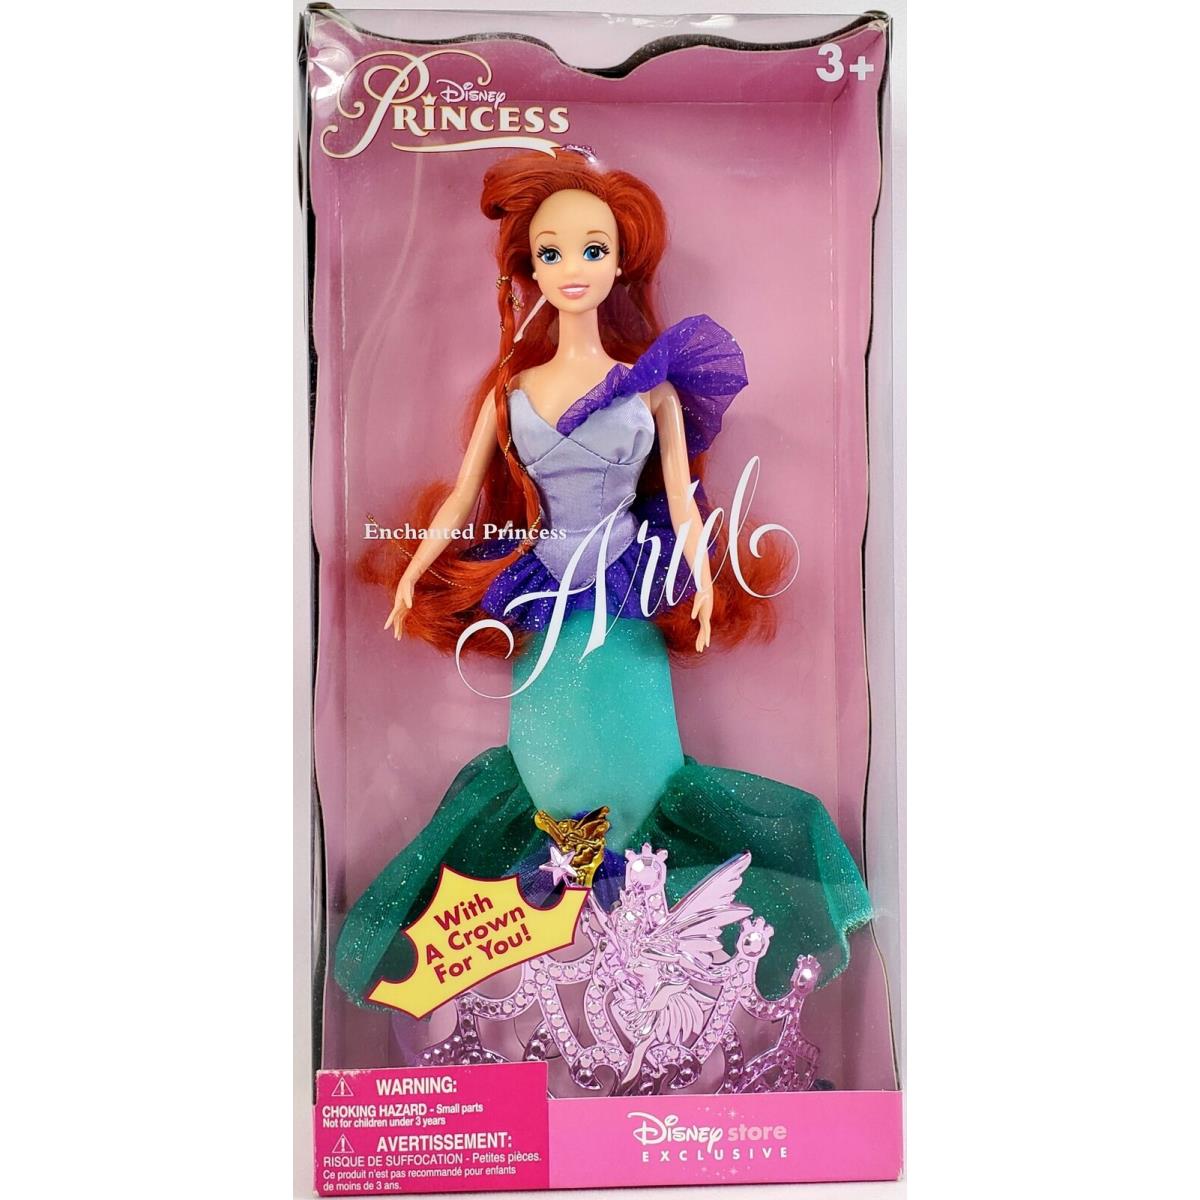 Disney Store Exclusive Enchanted Princess Ariel Doll and Crown Nrfb